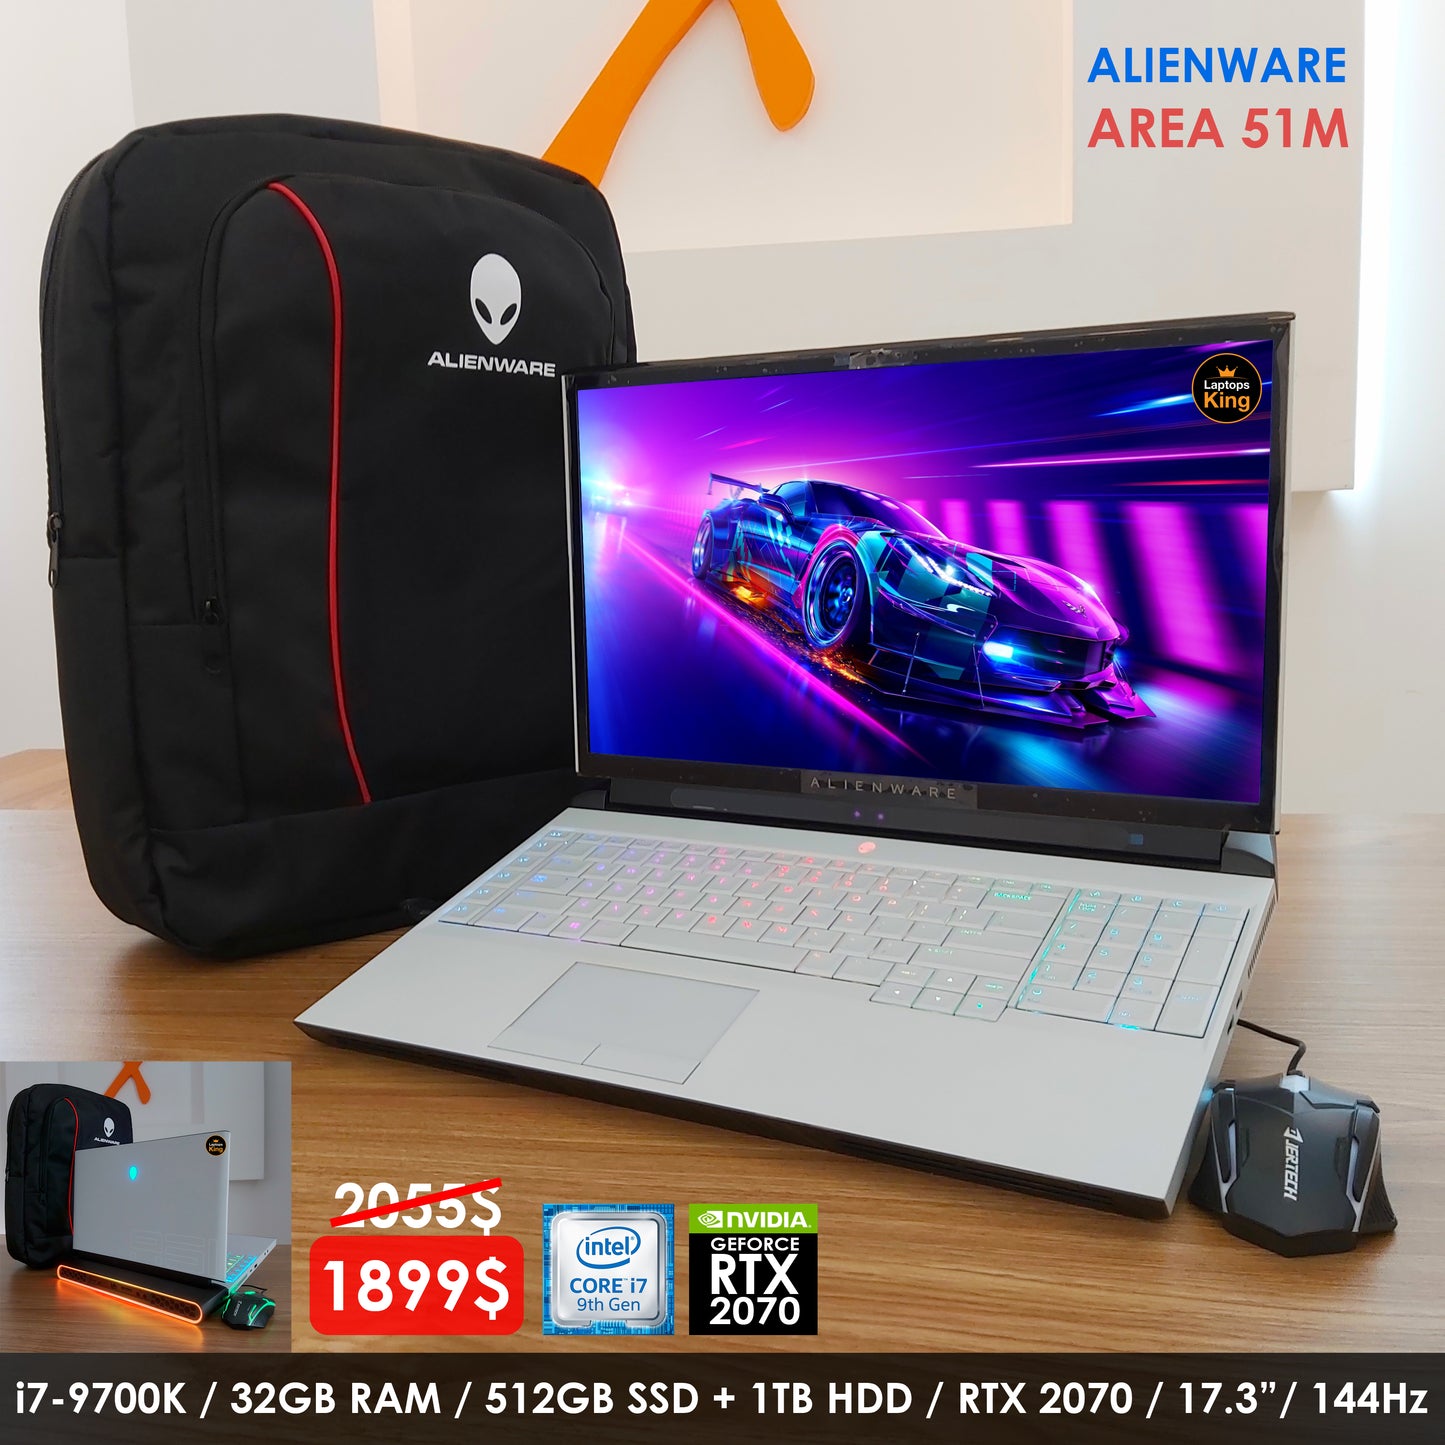 Alienware Area 51m i7-9700k RTX 2070 144hz Gaming Laptop (New Open Box) Gaming laptop, Graphic Design laptop, best laptop for gaming, best laptop for graphic design, computer for sale Lebanon, laptop for video editing in Lebanon, laptop for sale Lebanon, best graphic design laptop,	best video editing laptop, best programming laptop, laptop for sale in Lebanon, laptops for sale in Lebanon, laptop for sale in Lebanon, buy computer Lebanon, buy laptop Lebanon.